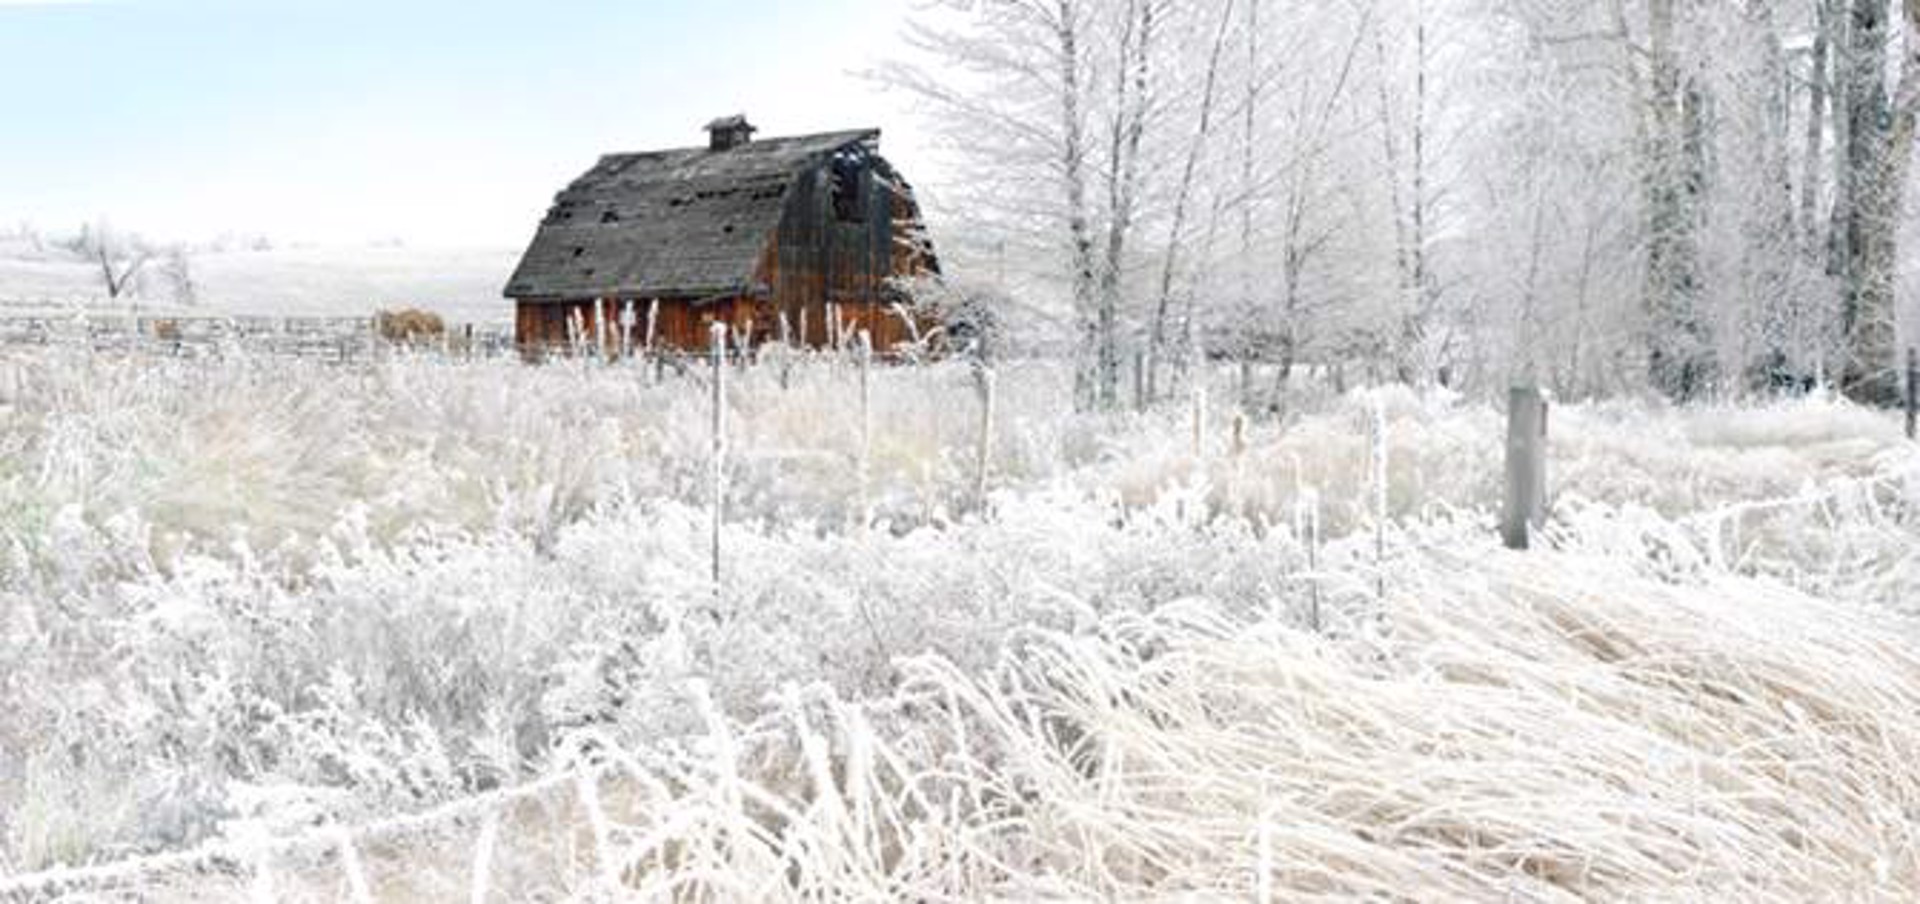 Barn and Hoar Frost (8x17 Paper) by Pete Ramberg